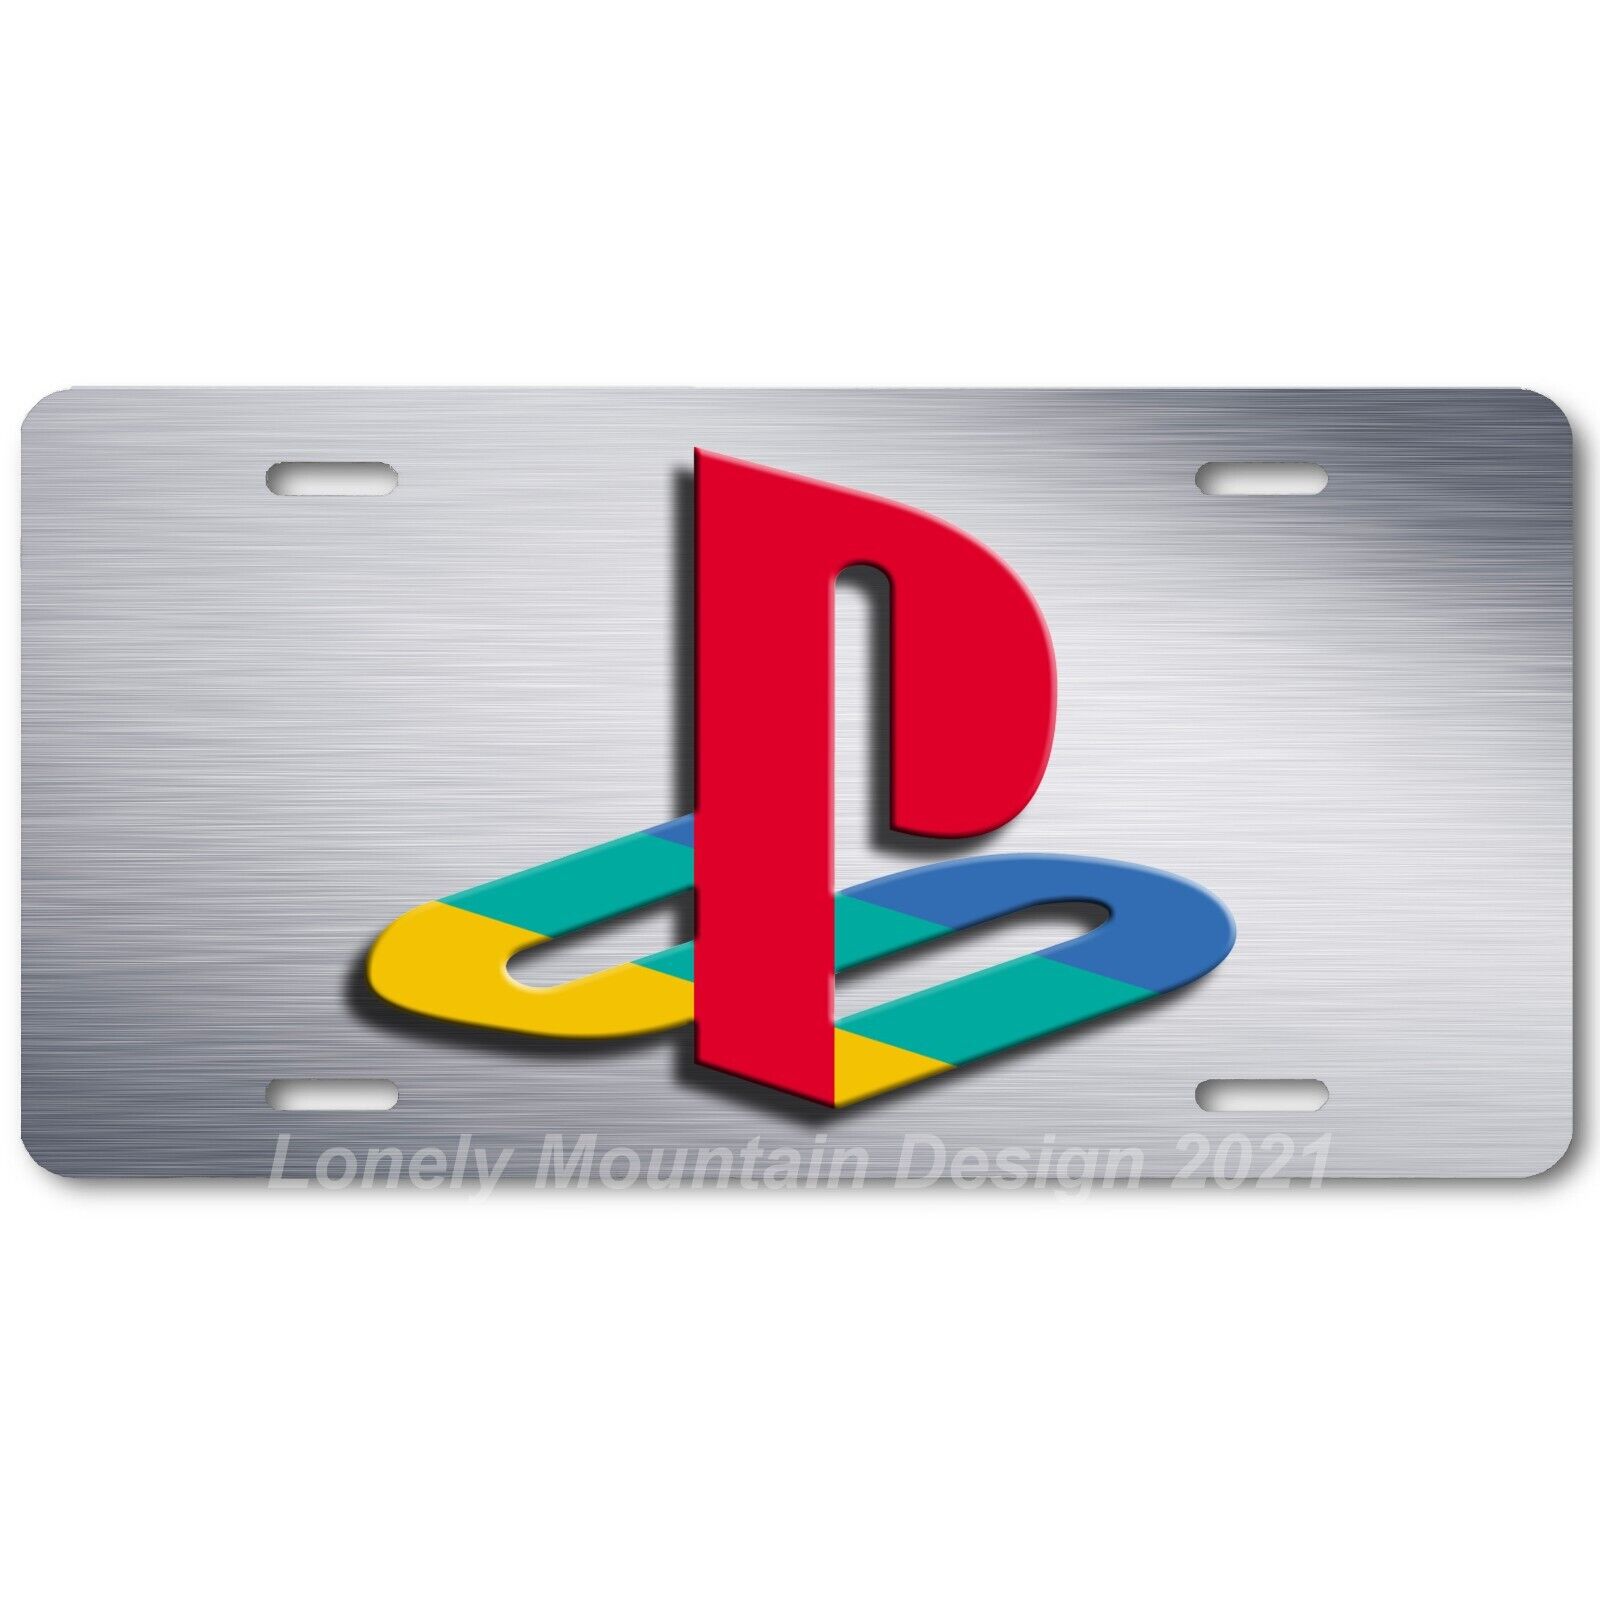 Sony Playstation Inspired Art on Gray FLAT Aluminum Novelty License Tag Plate